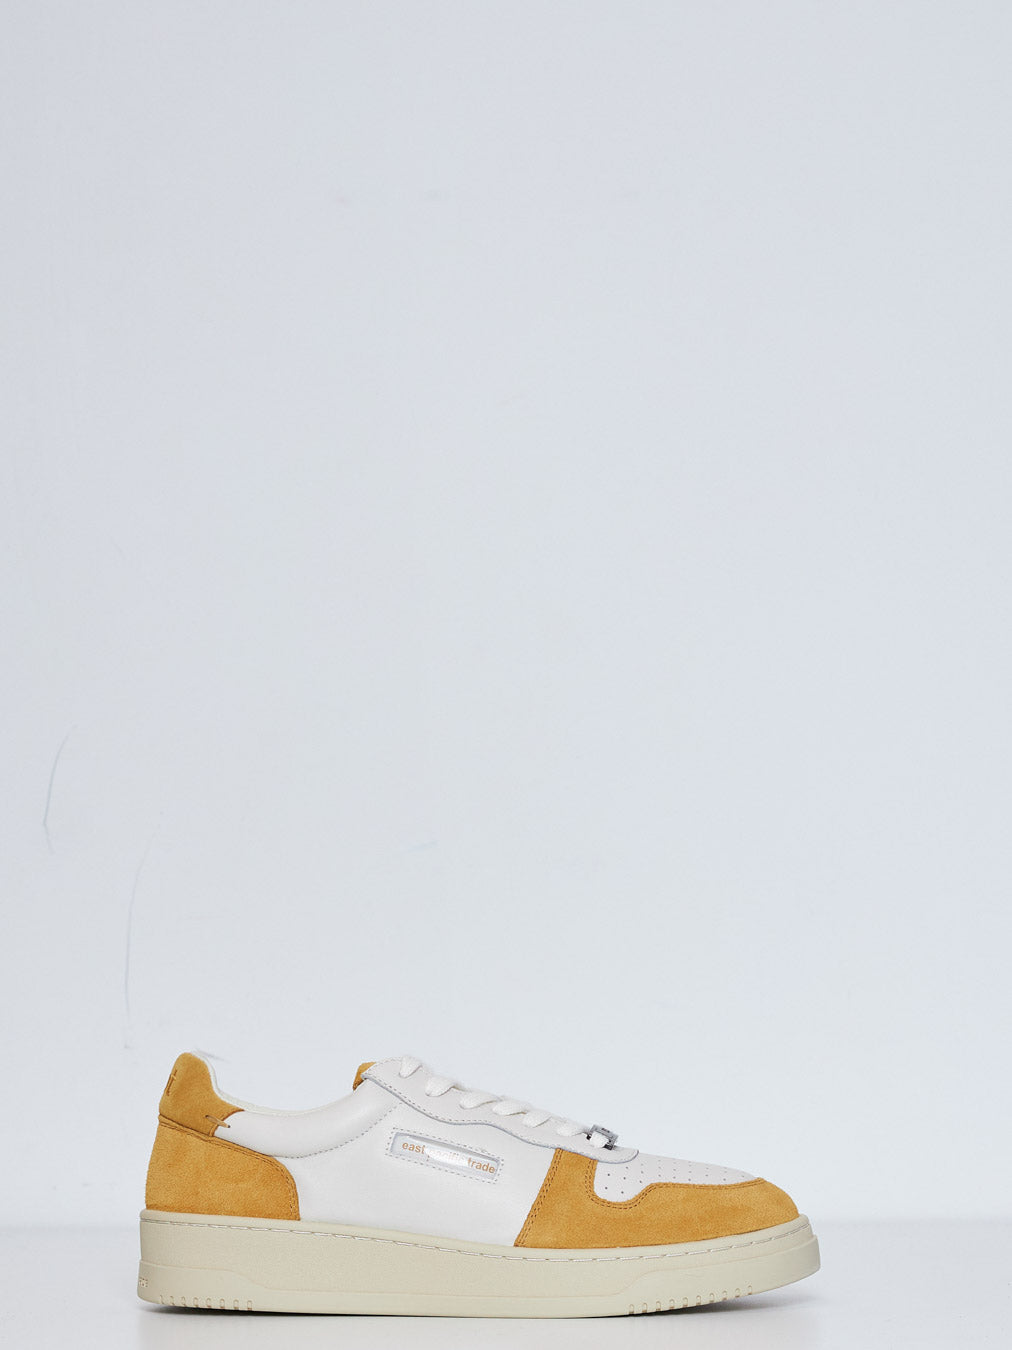 EPT Court white sneakers with mustard tab